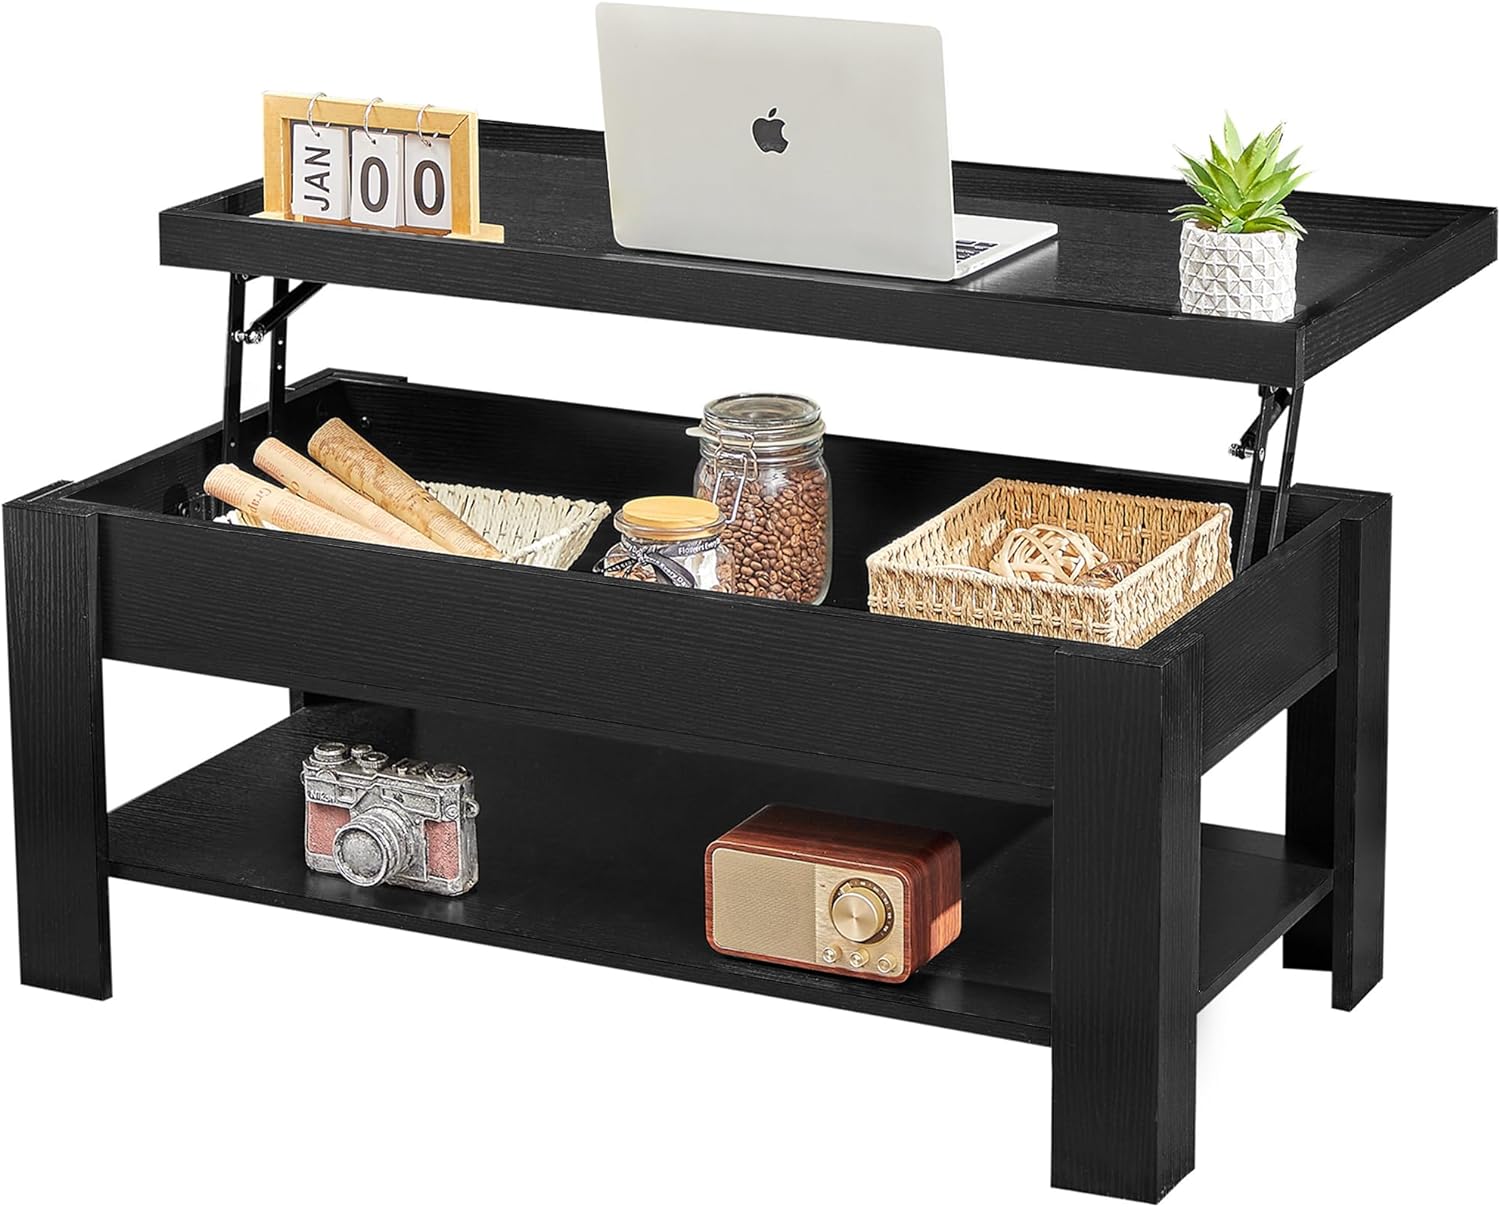 VECELO Lift Top Coffee Table with Storage Shelf and Hidden Compartment for Living Room/Office Reception, Black